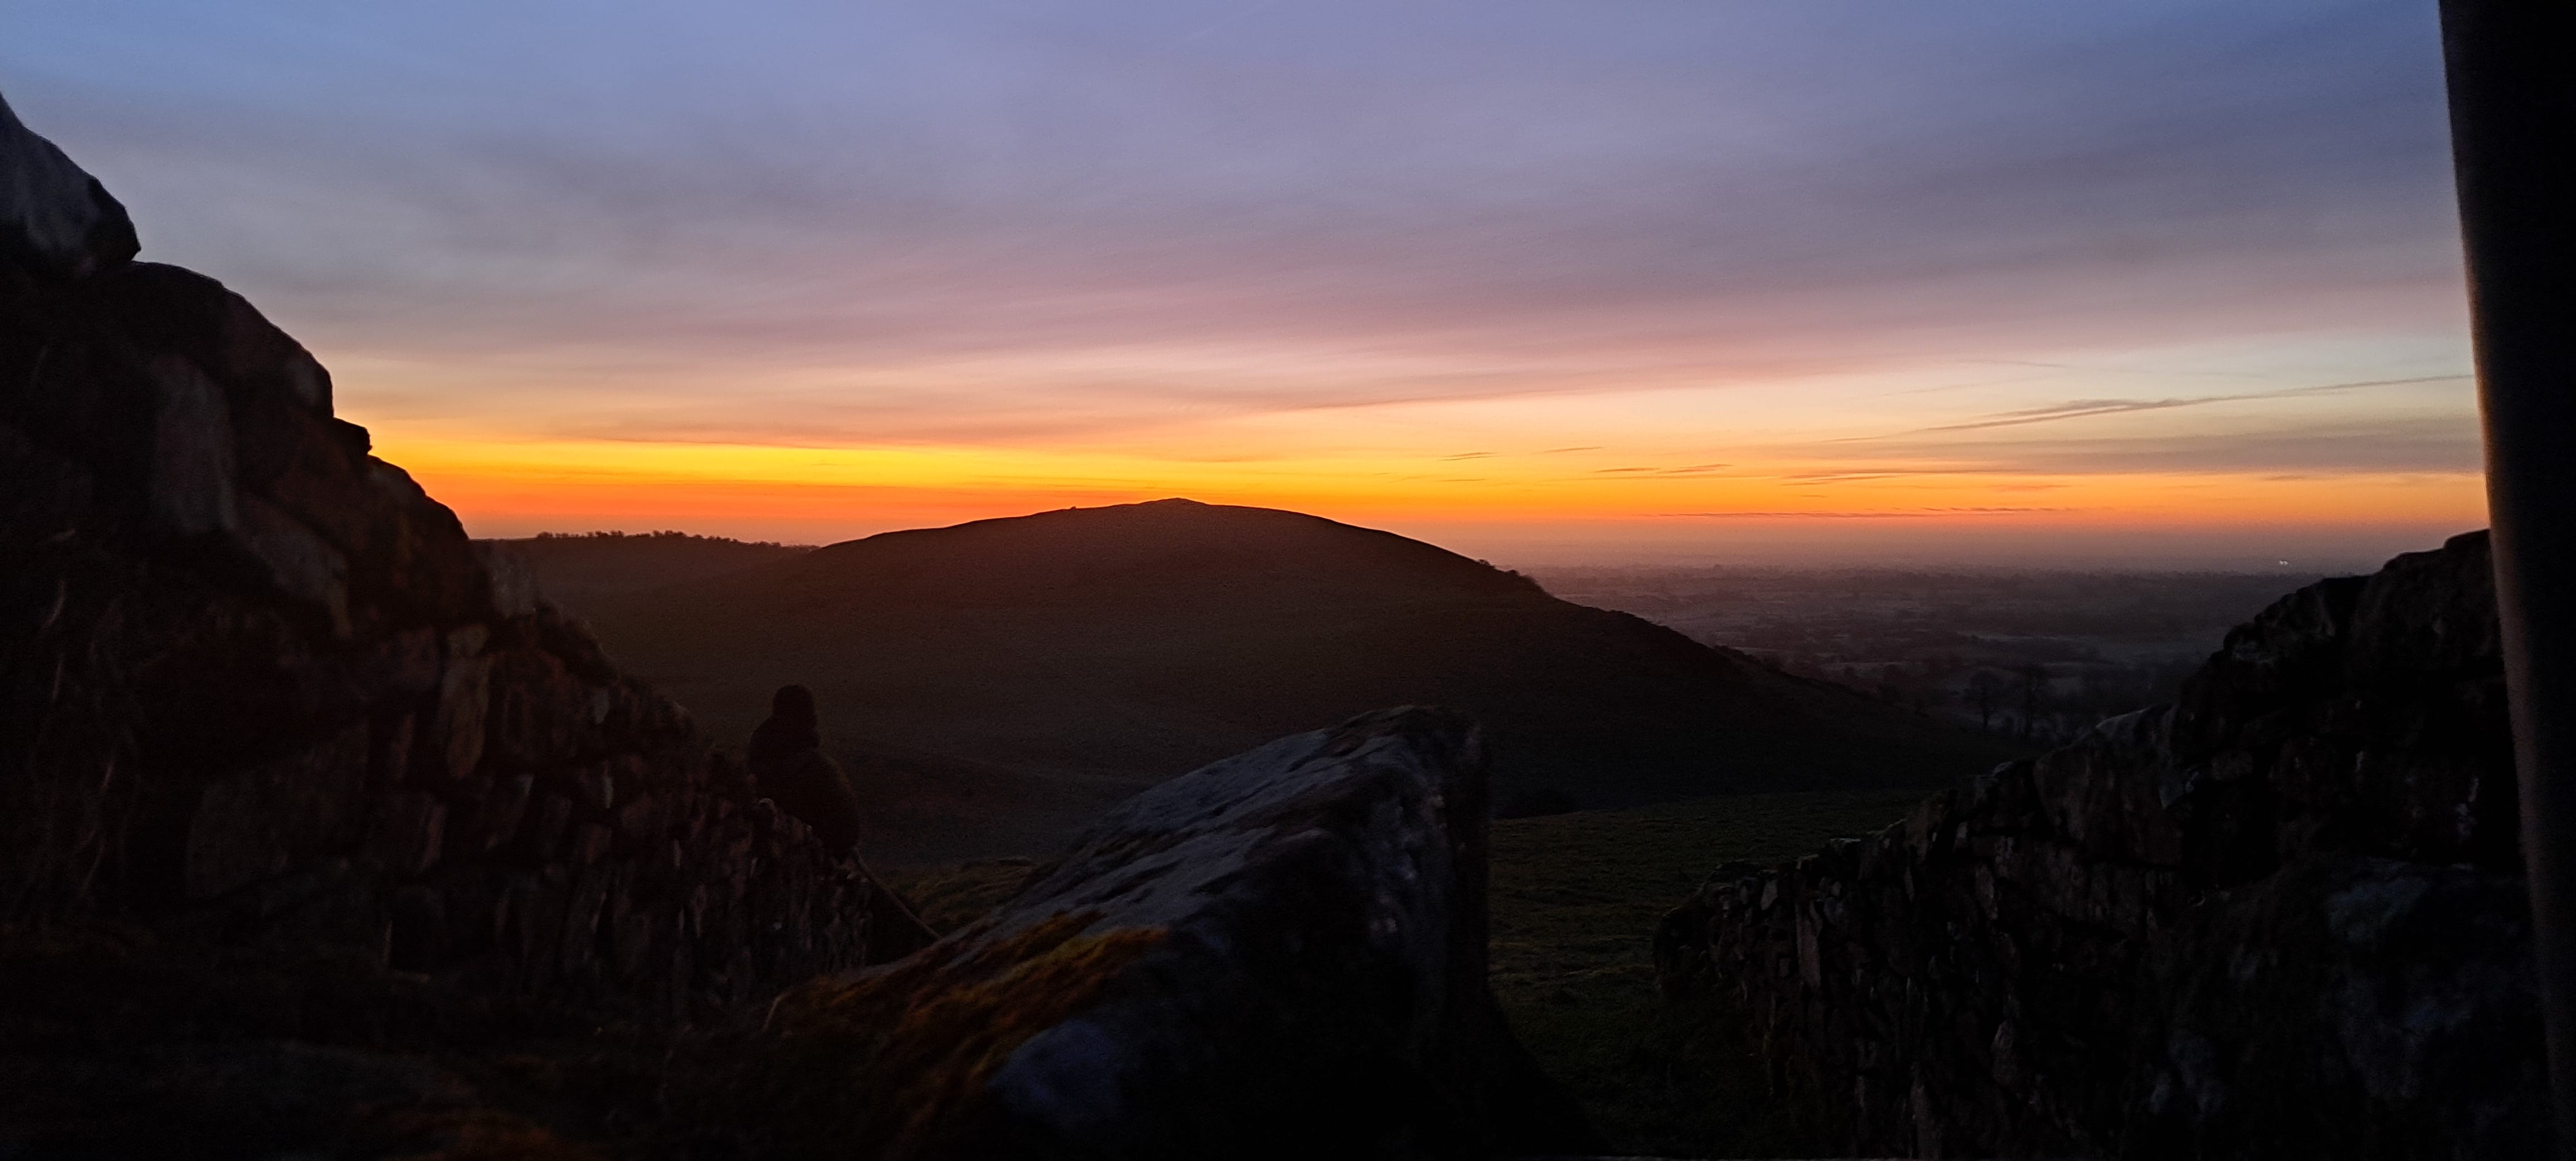 Dawn over the hilld and monuments of Loughcrew, the sky has shades of orange and gold and lilac fading into grey-blue as the sun is about to make an appearance over the hill.